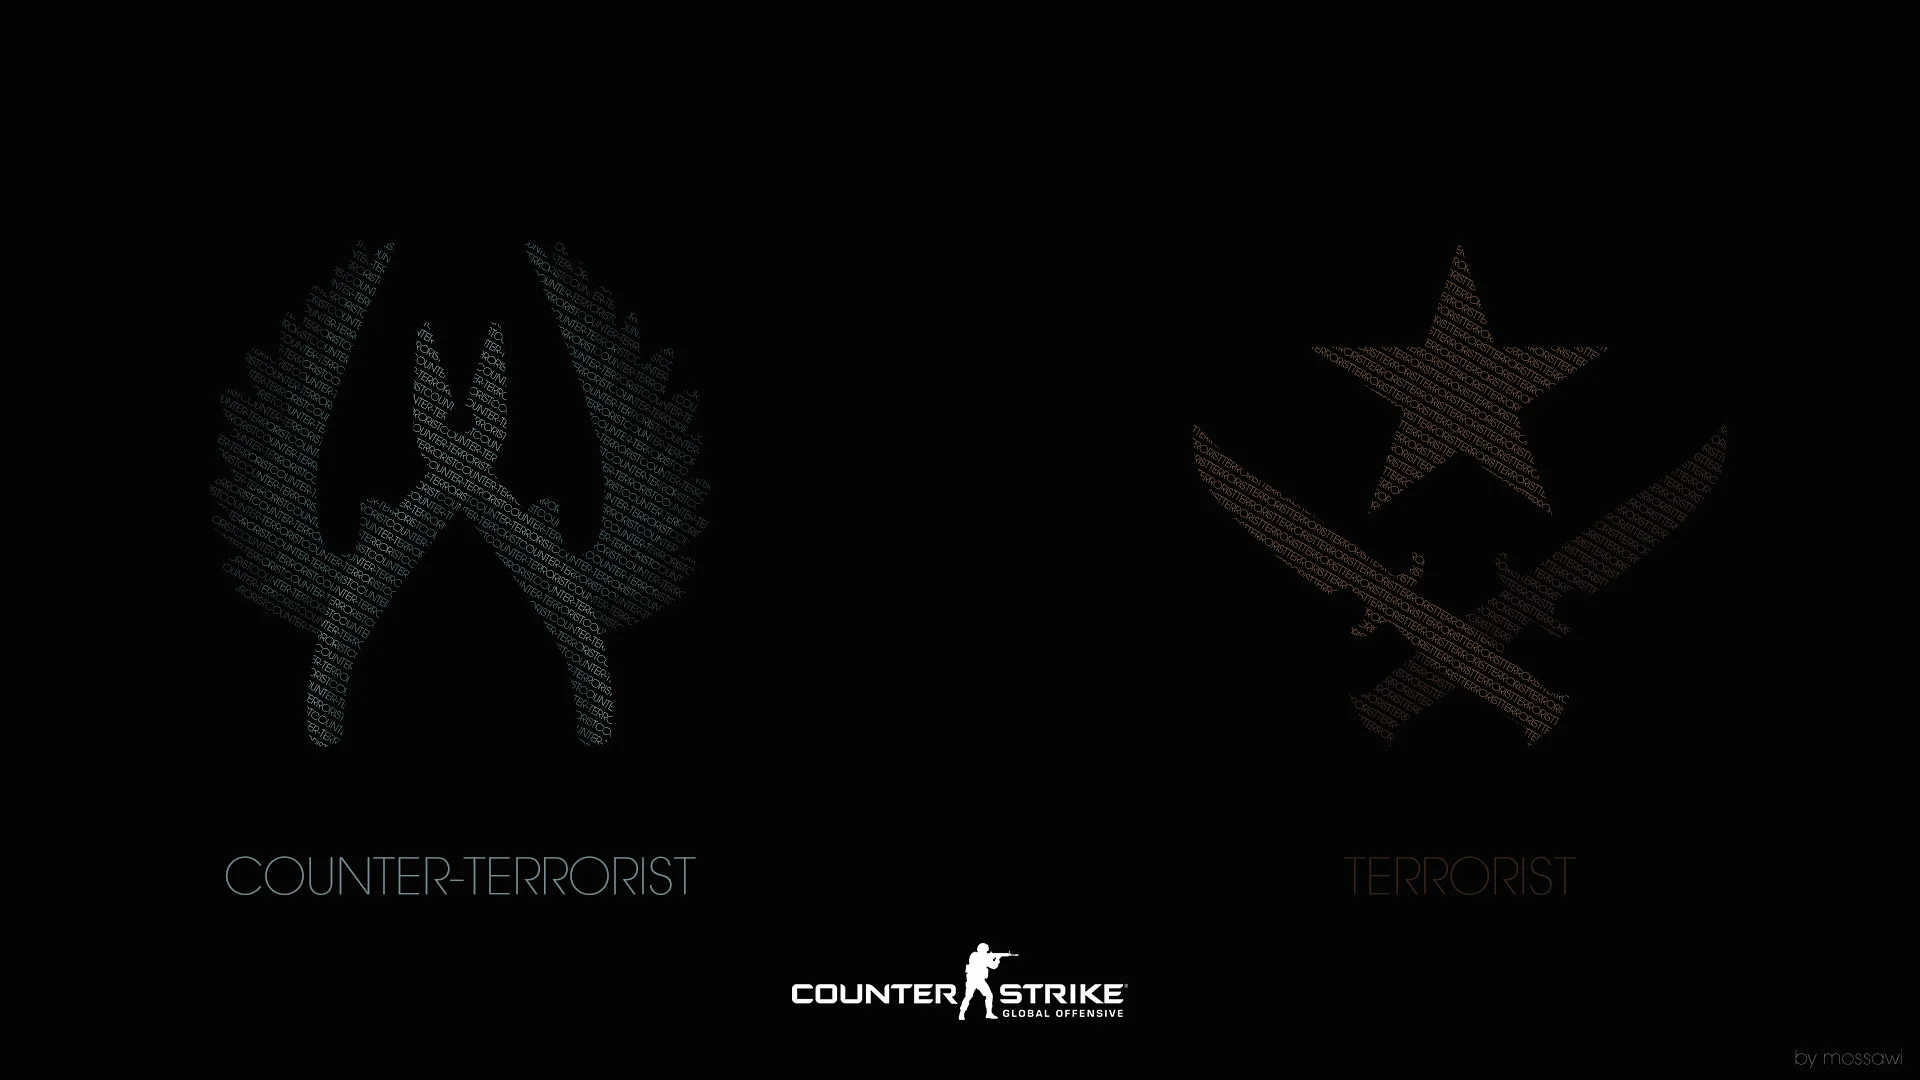 … https://www.mossawi.nl/csgo/assets/images/original/ct_t_background.png